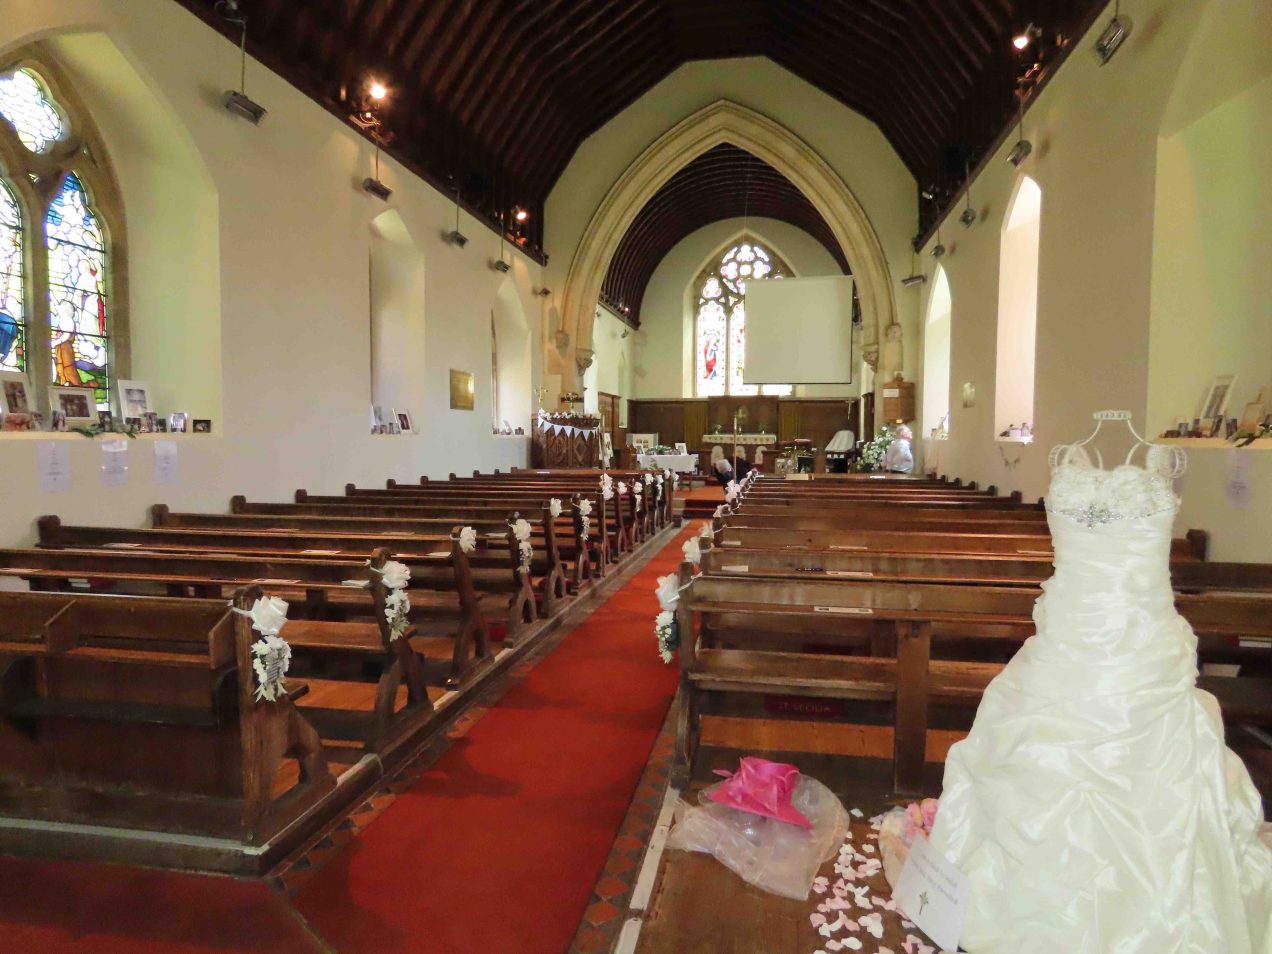 Exhibition of Past Weddings Highlights Church’s Role in Family Life